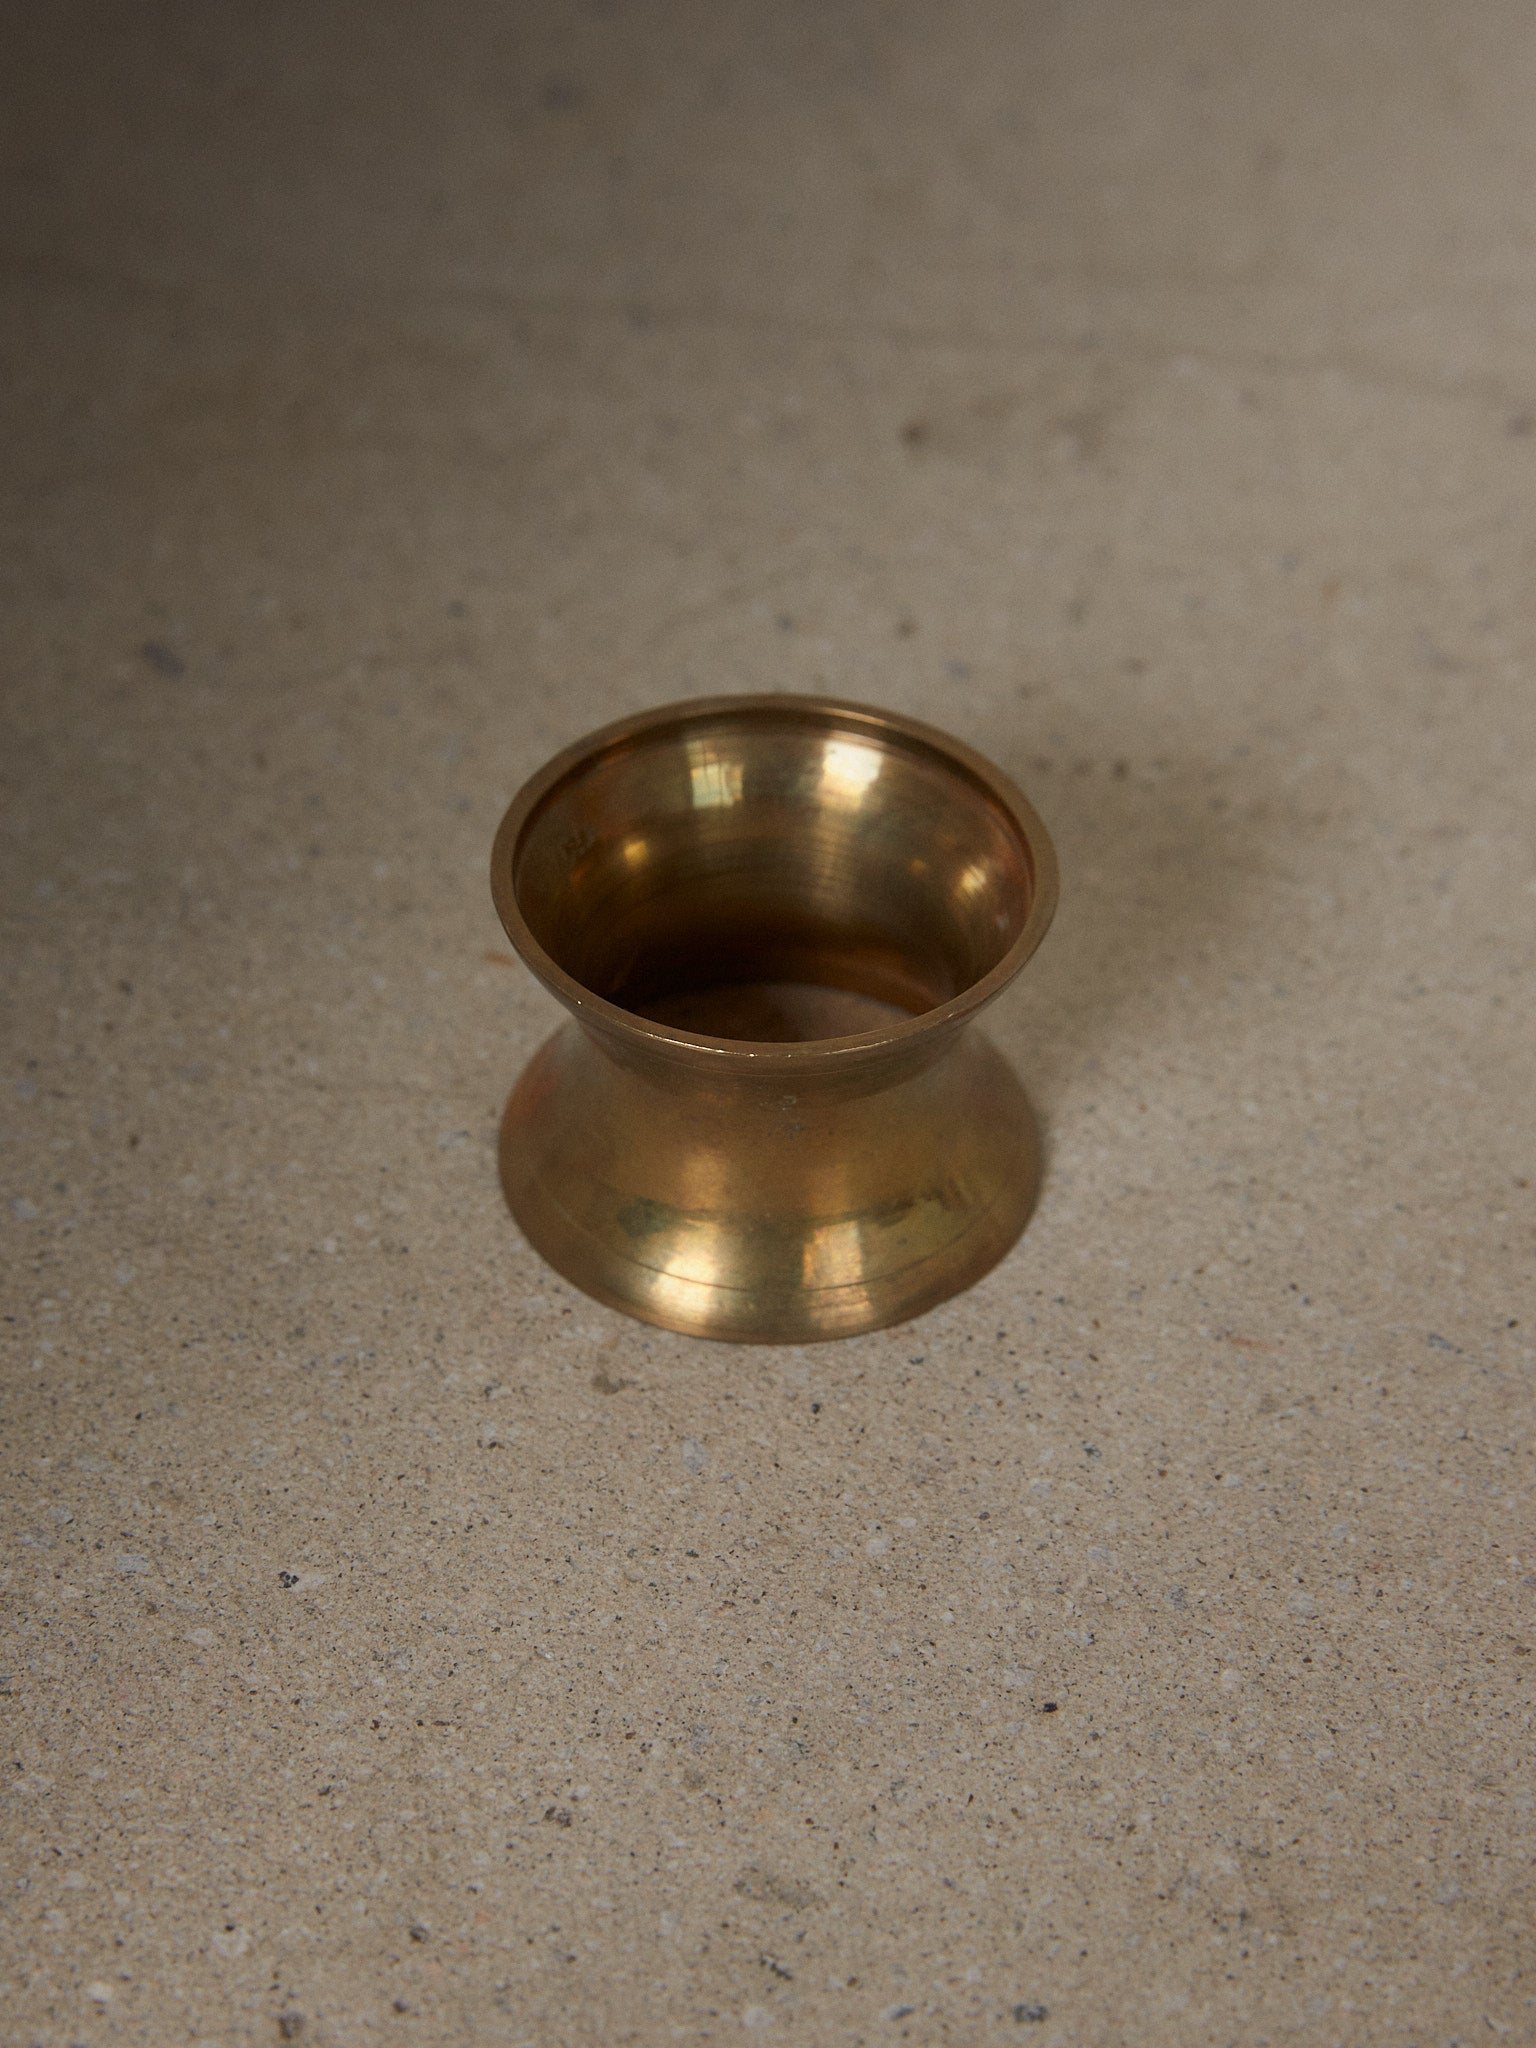 Curve Napkin Ring Set. Rare vintage find. Set of six minimalist solid brass napkin rings with a distinctively curved bodice.